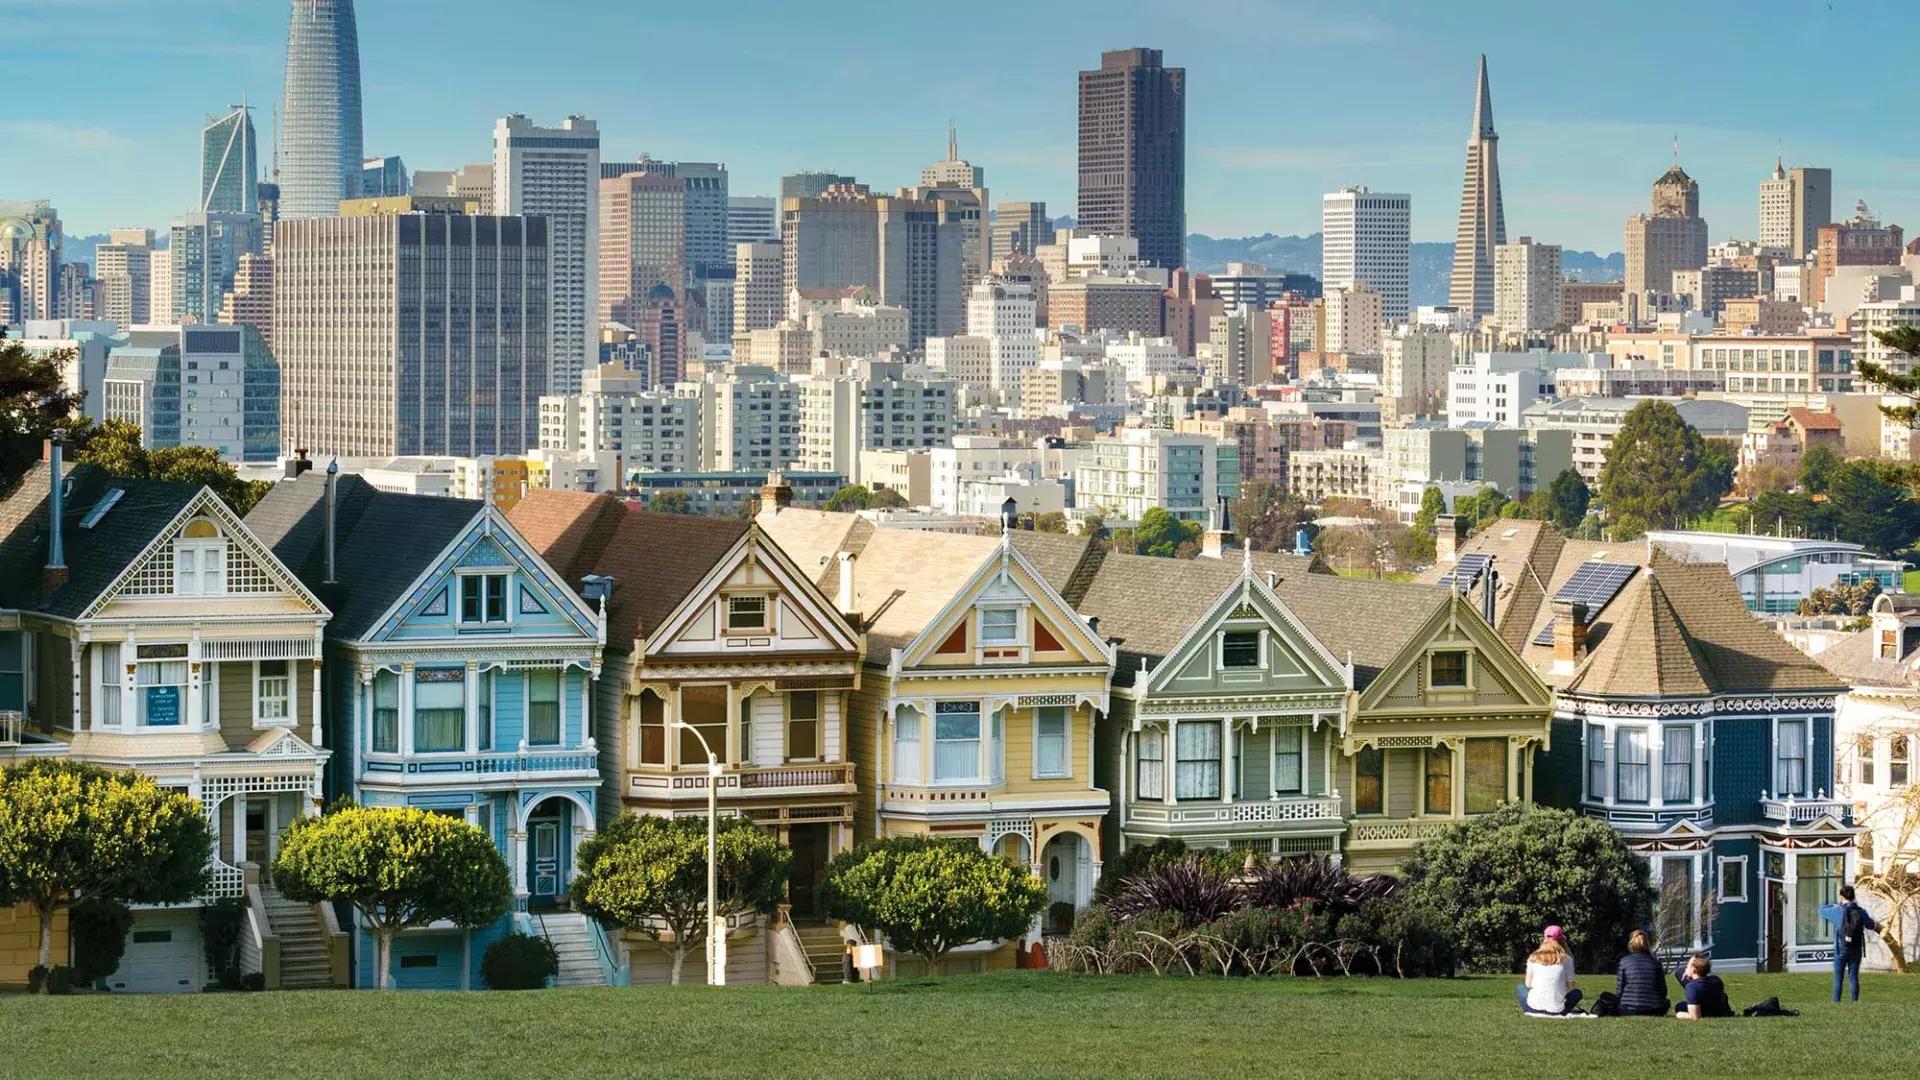 Picnickers sit on the grass at Alamo Square Park with the Painted Ladies and San Francisco skyline in the background.